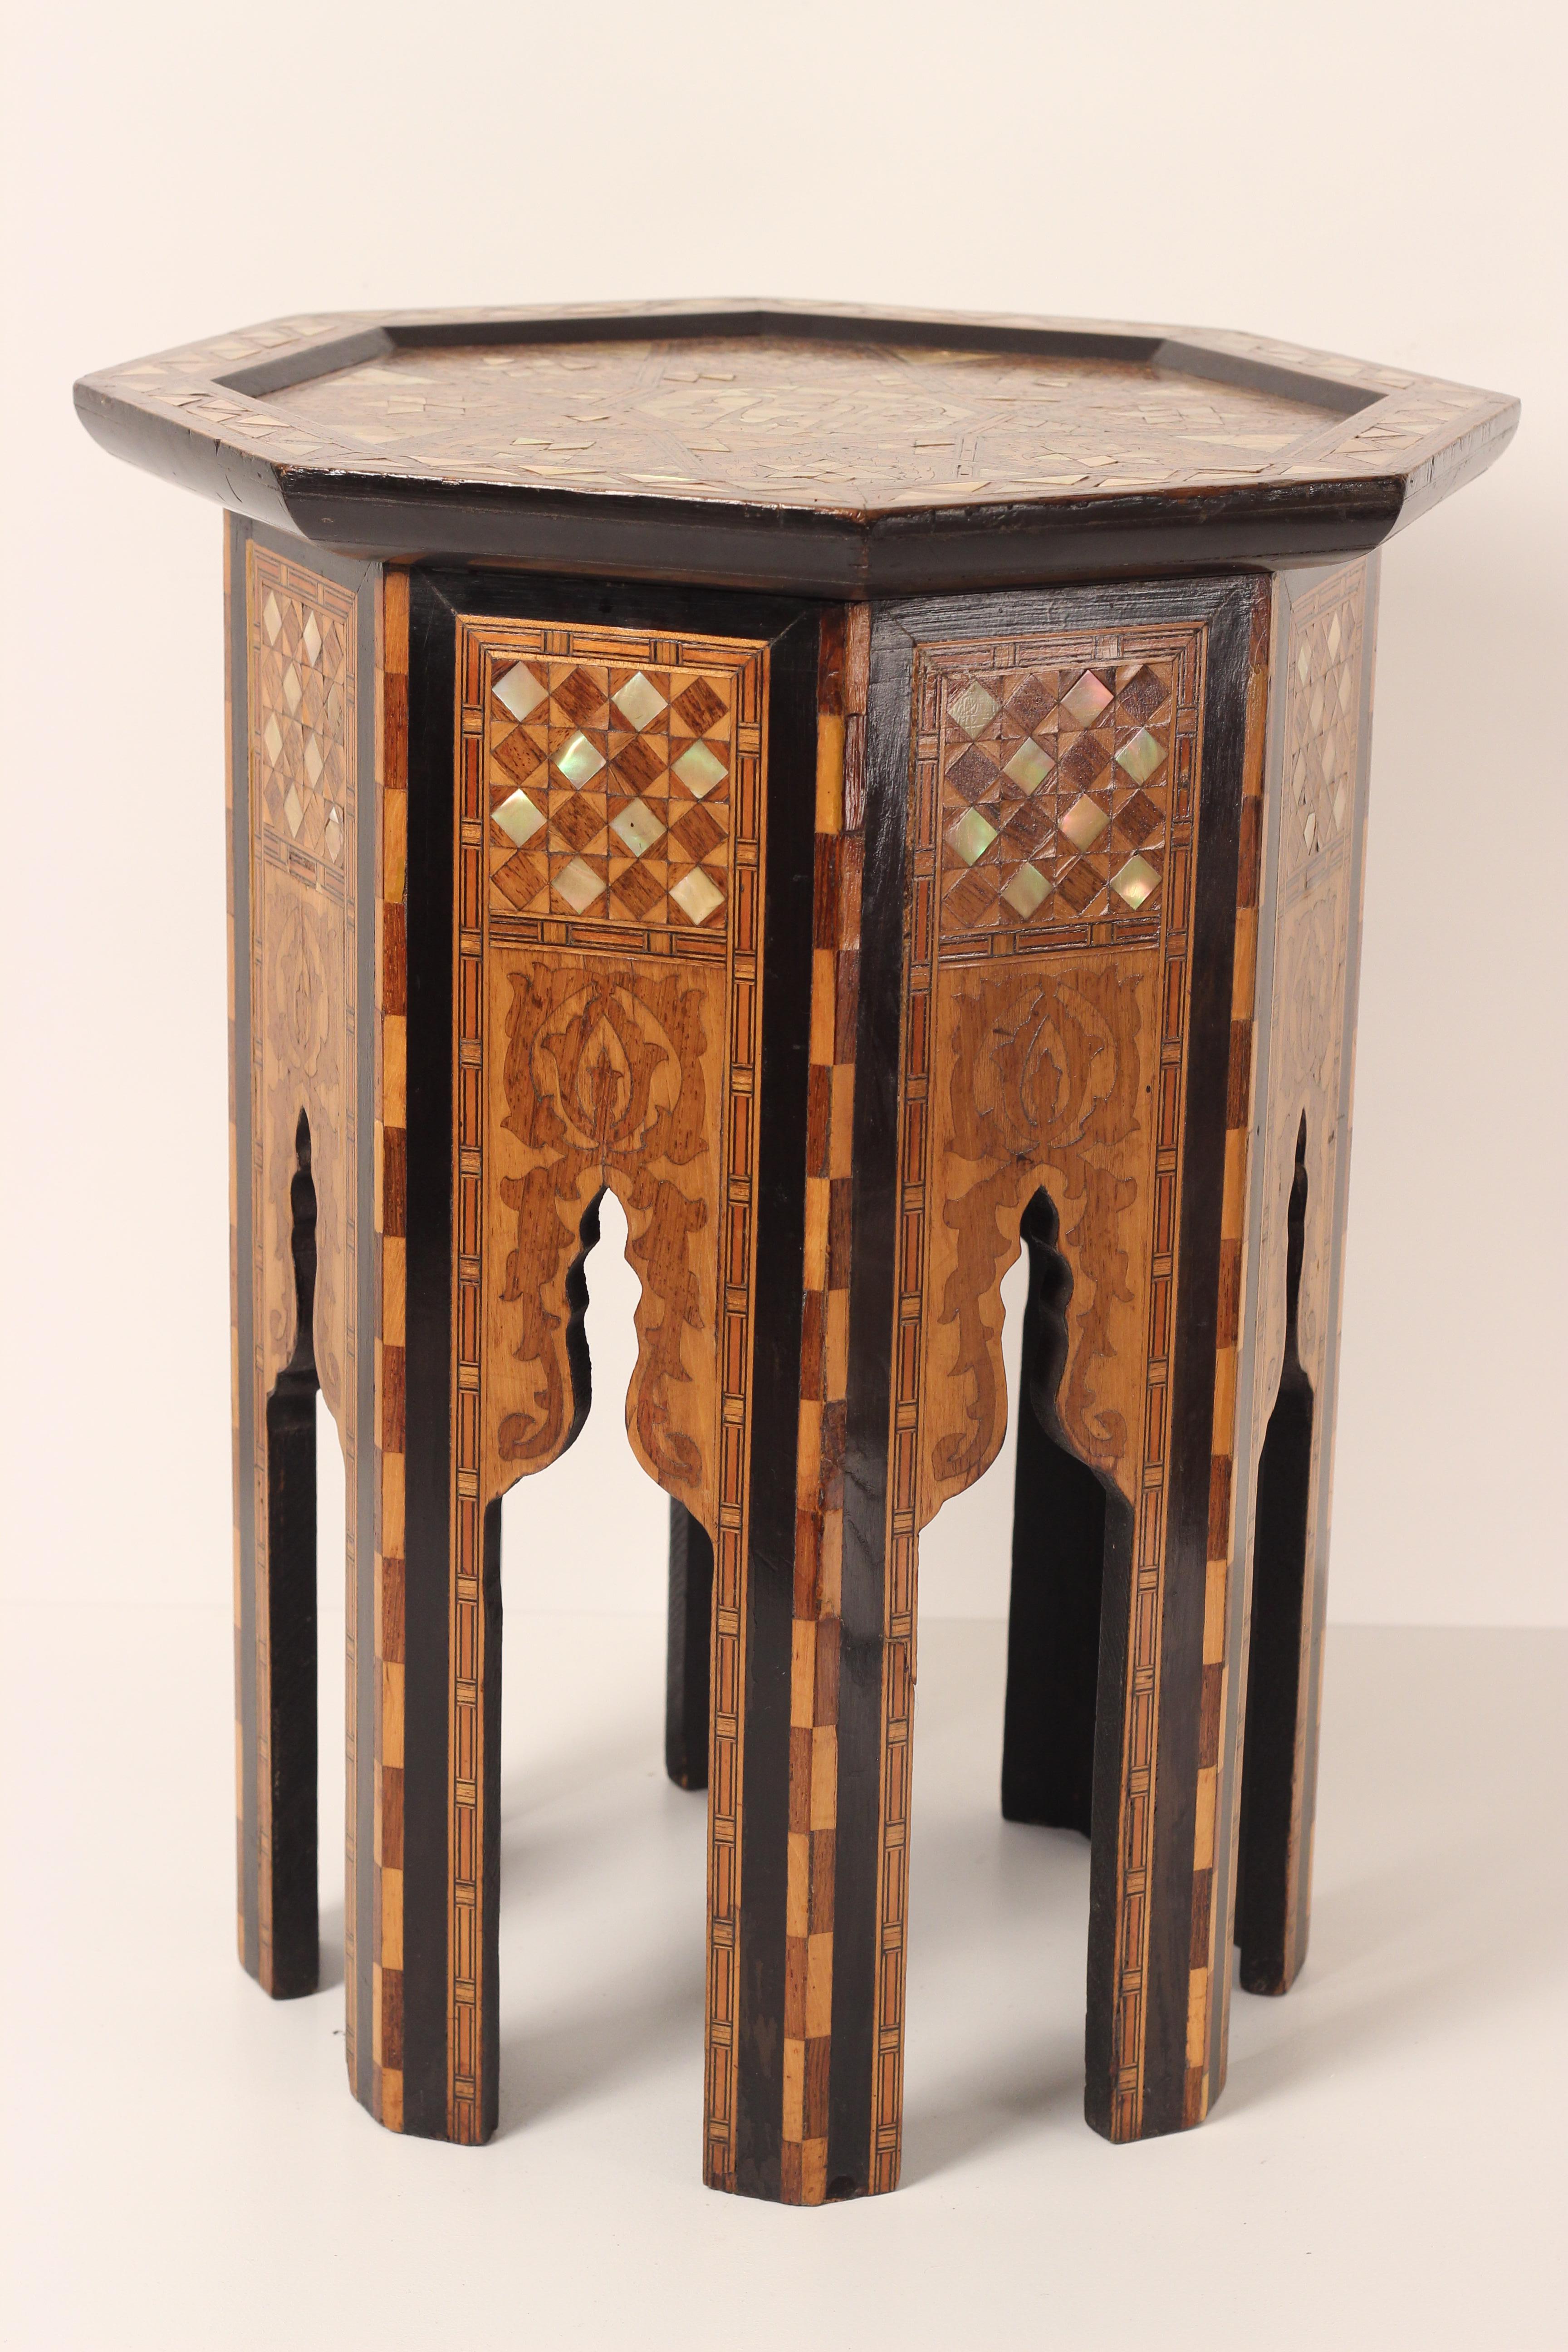 Syrian Boho Chic style Octagonal Table,  Mother of Pearl Inlay Attr Liberty & Co.